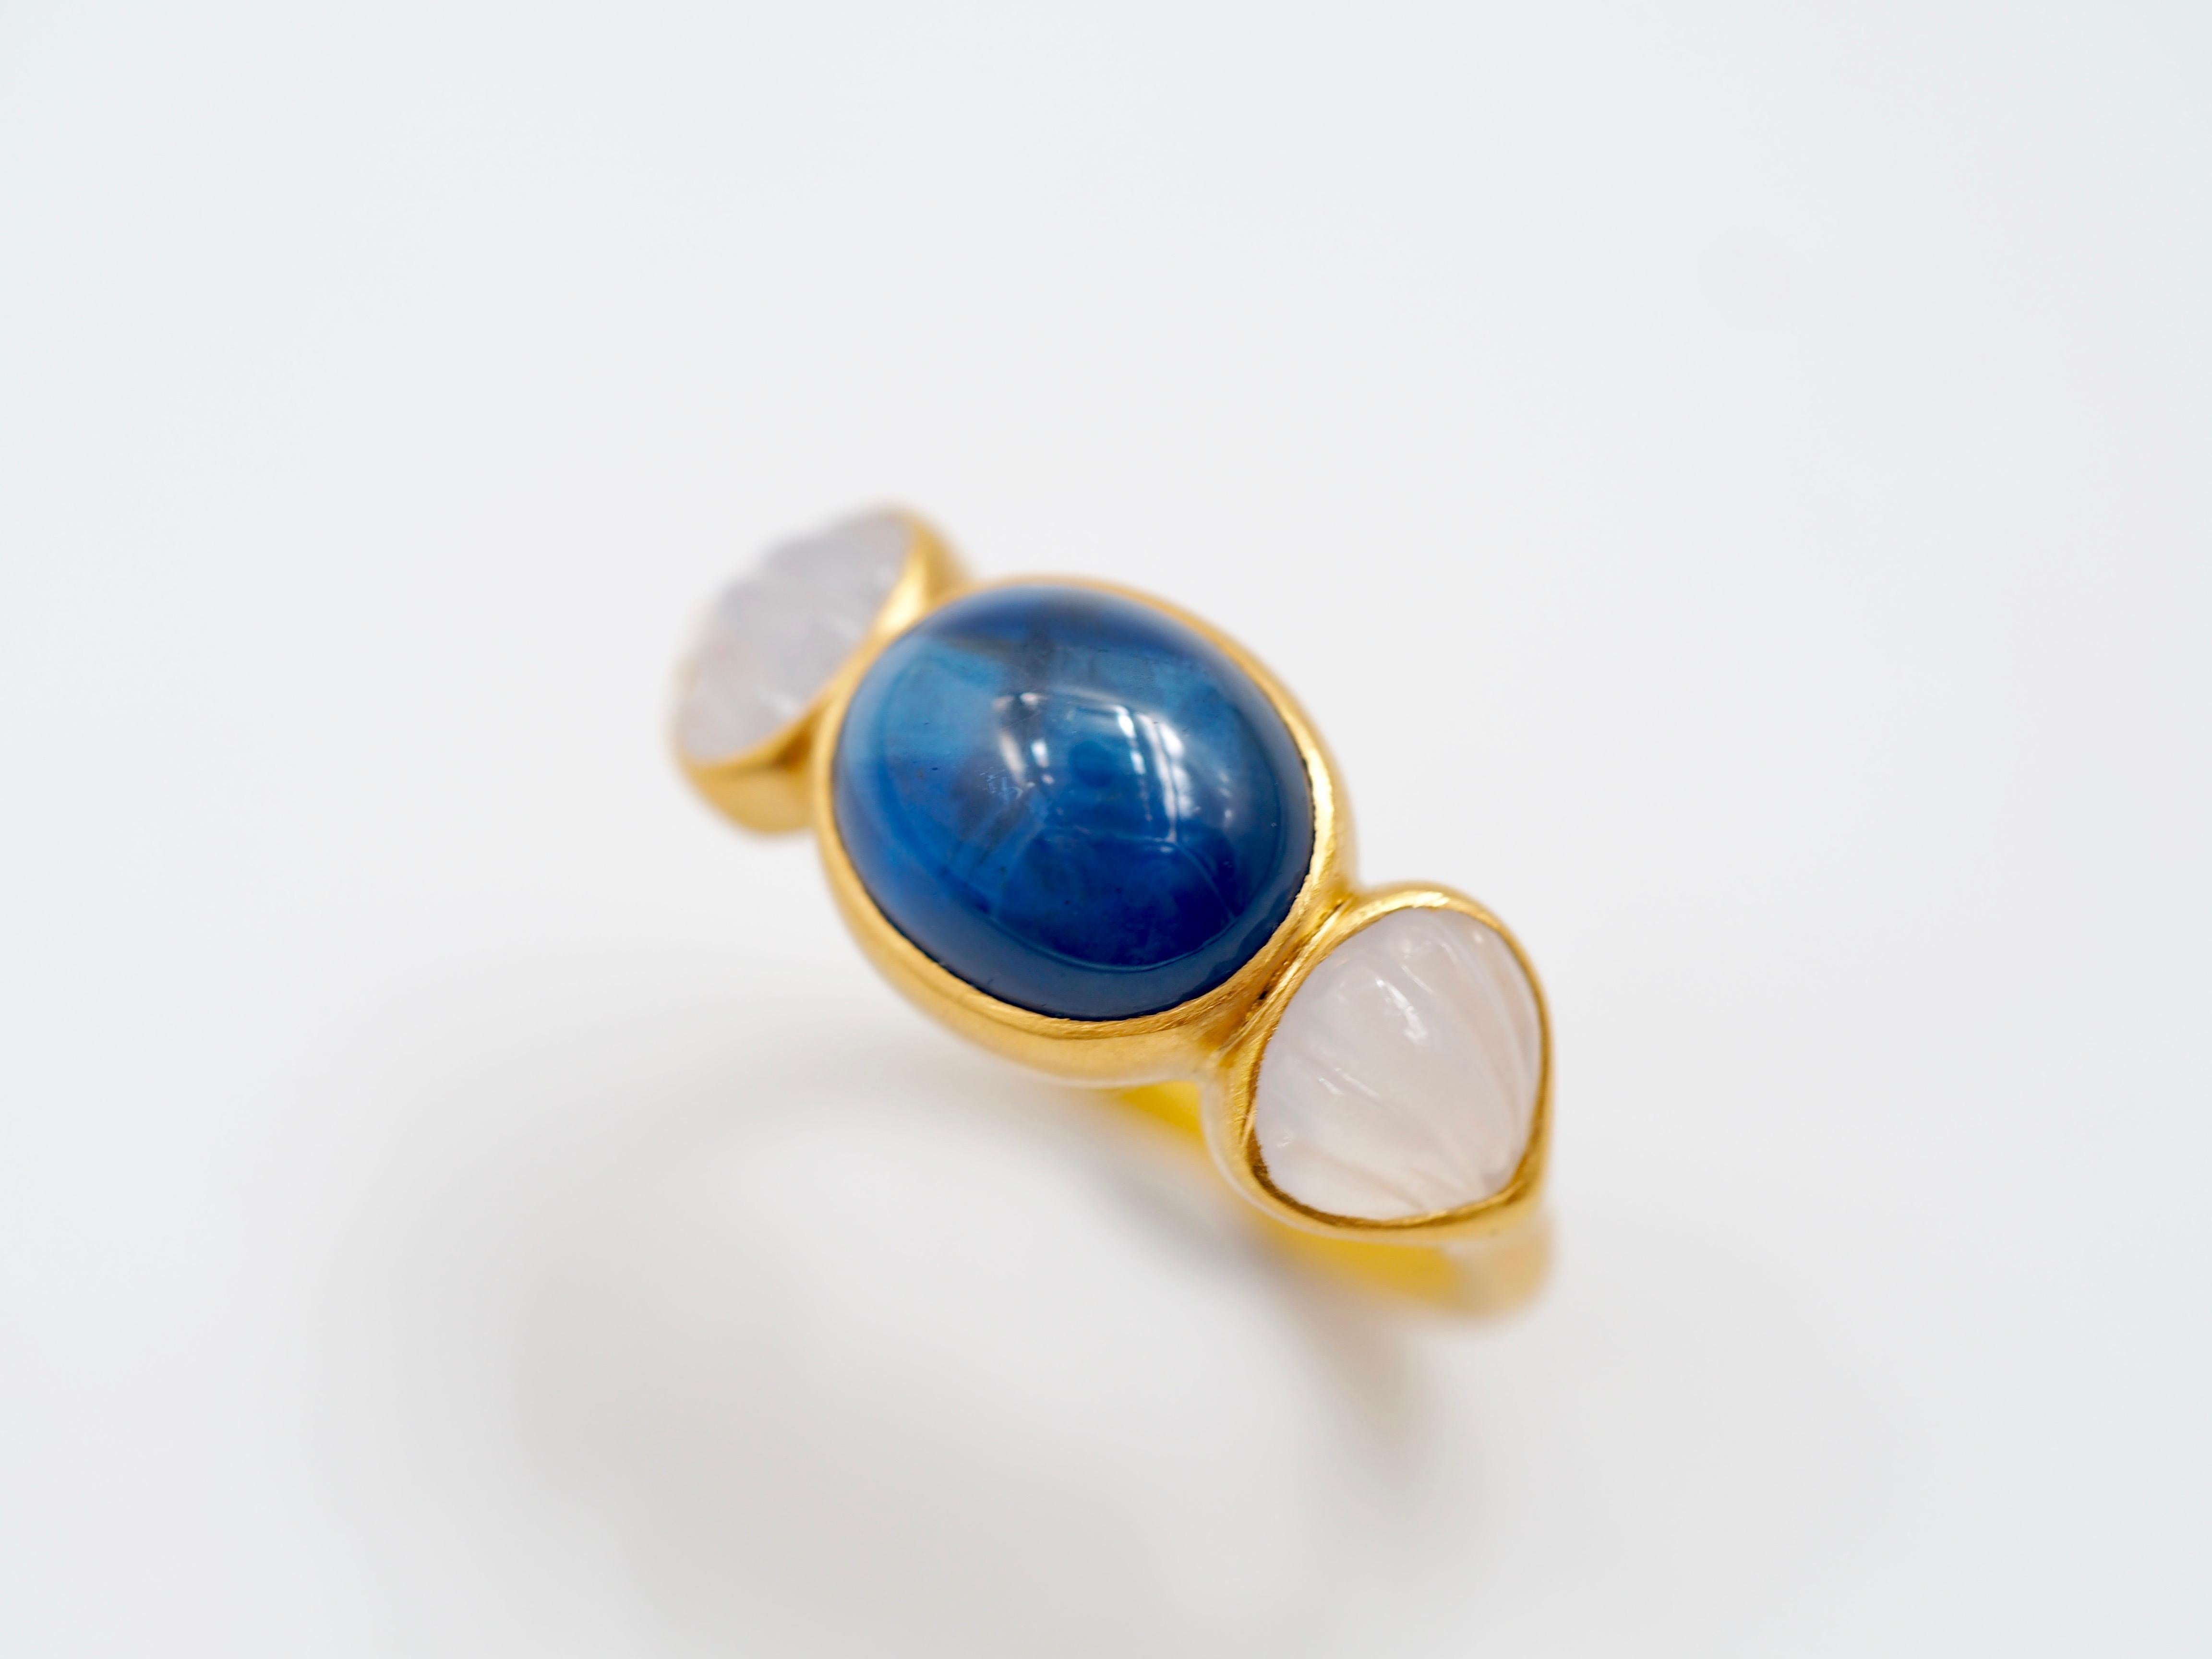 Scrives 7.58 carat Blue Sapphire Cabochon White Chalcedony 22 Karat Gold Ring In New Condition For Sale In Paris, Paris